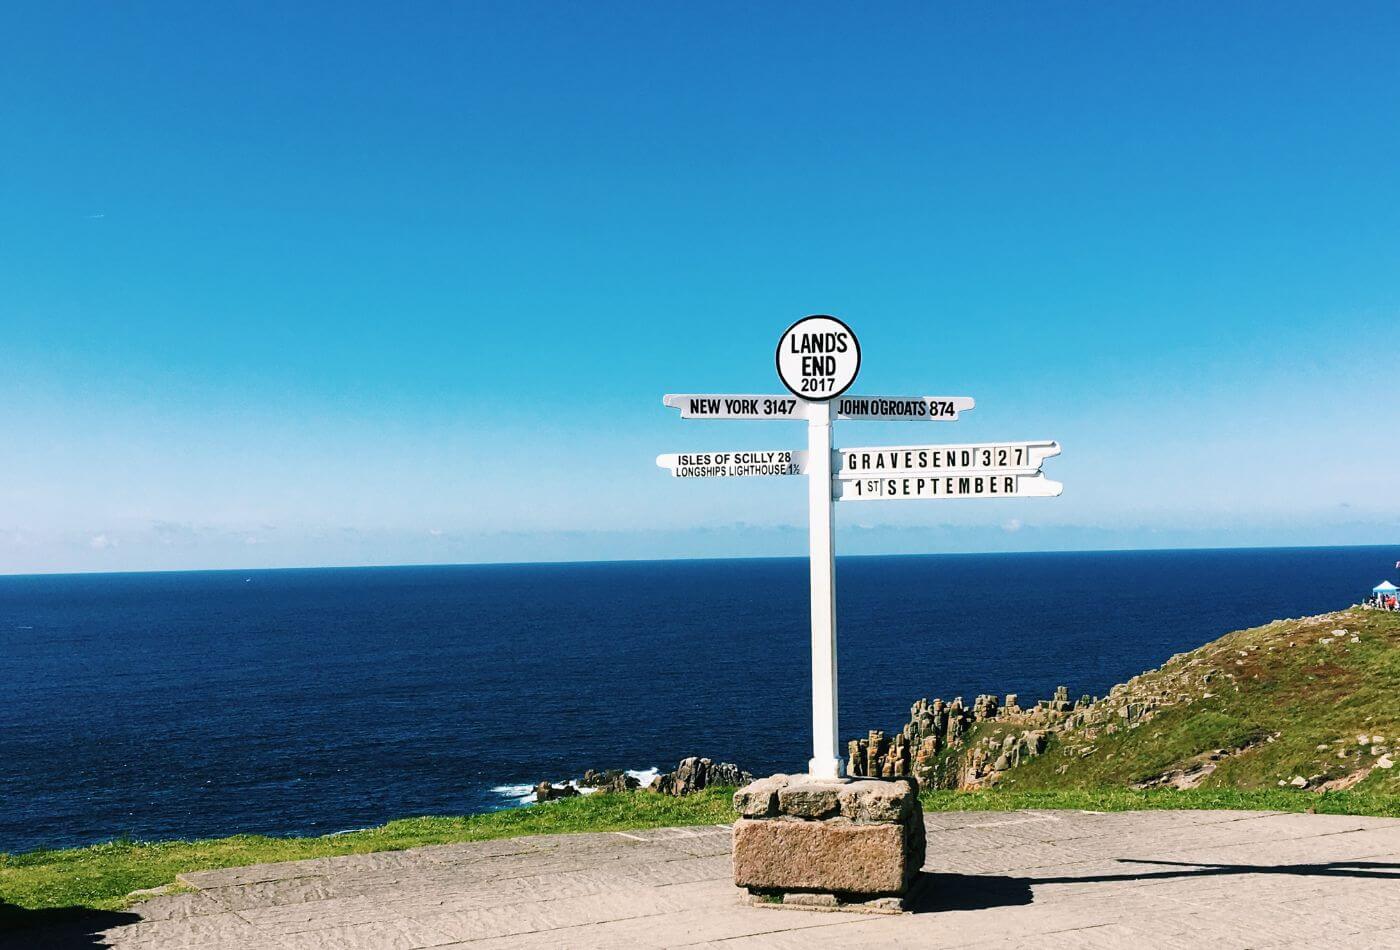 Lands End and The Iconic Signpost